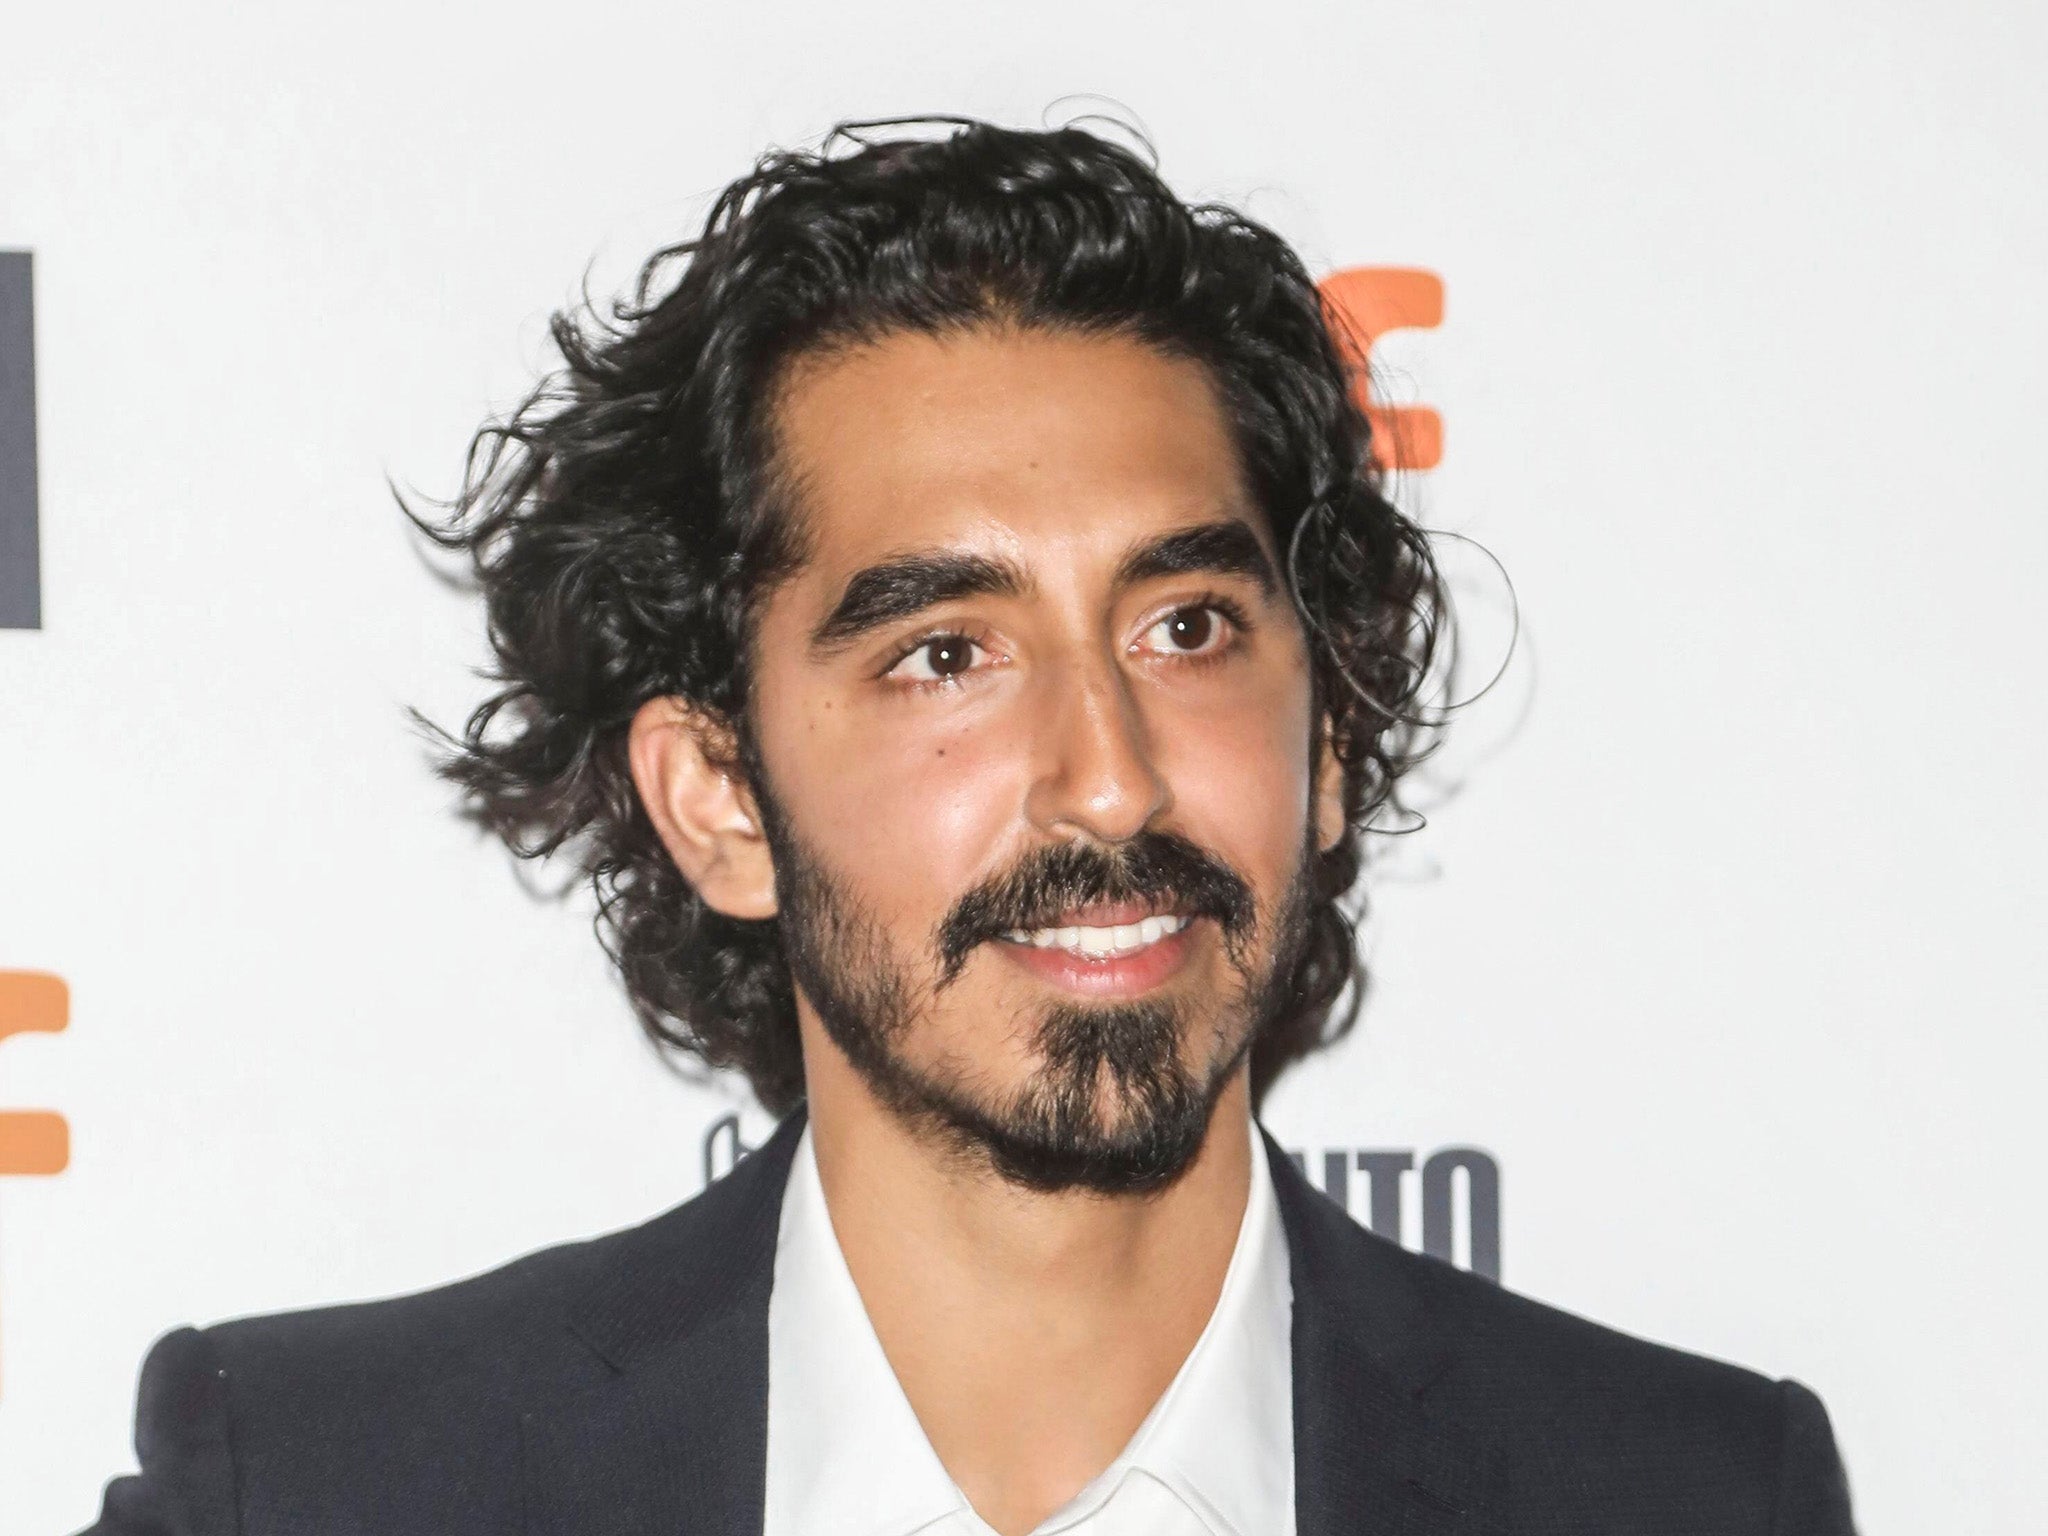 Dev Patel attempted to ‘de-escalate’ fight before witnessing stabbing ...